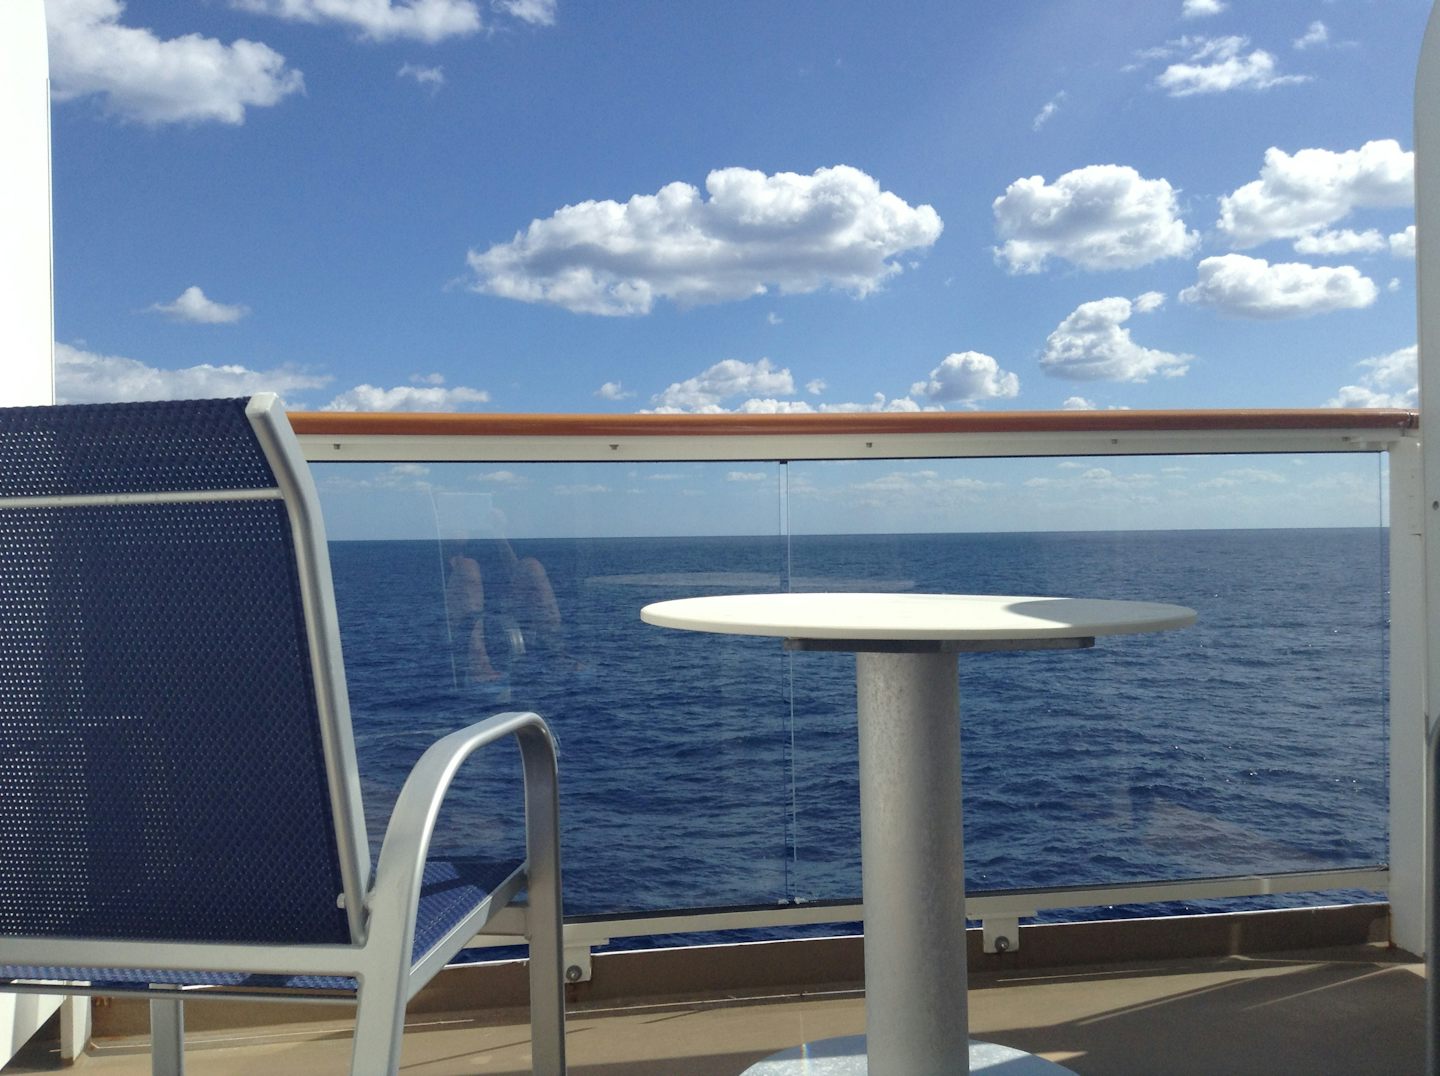 balcony mini suite. Not as nice or big as smaller ships.  Staff congregated to smoke on the deck. Water dripped